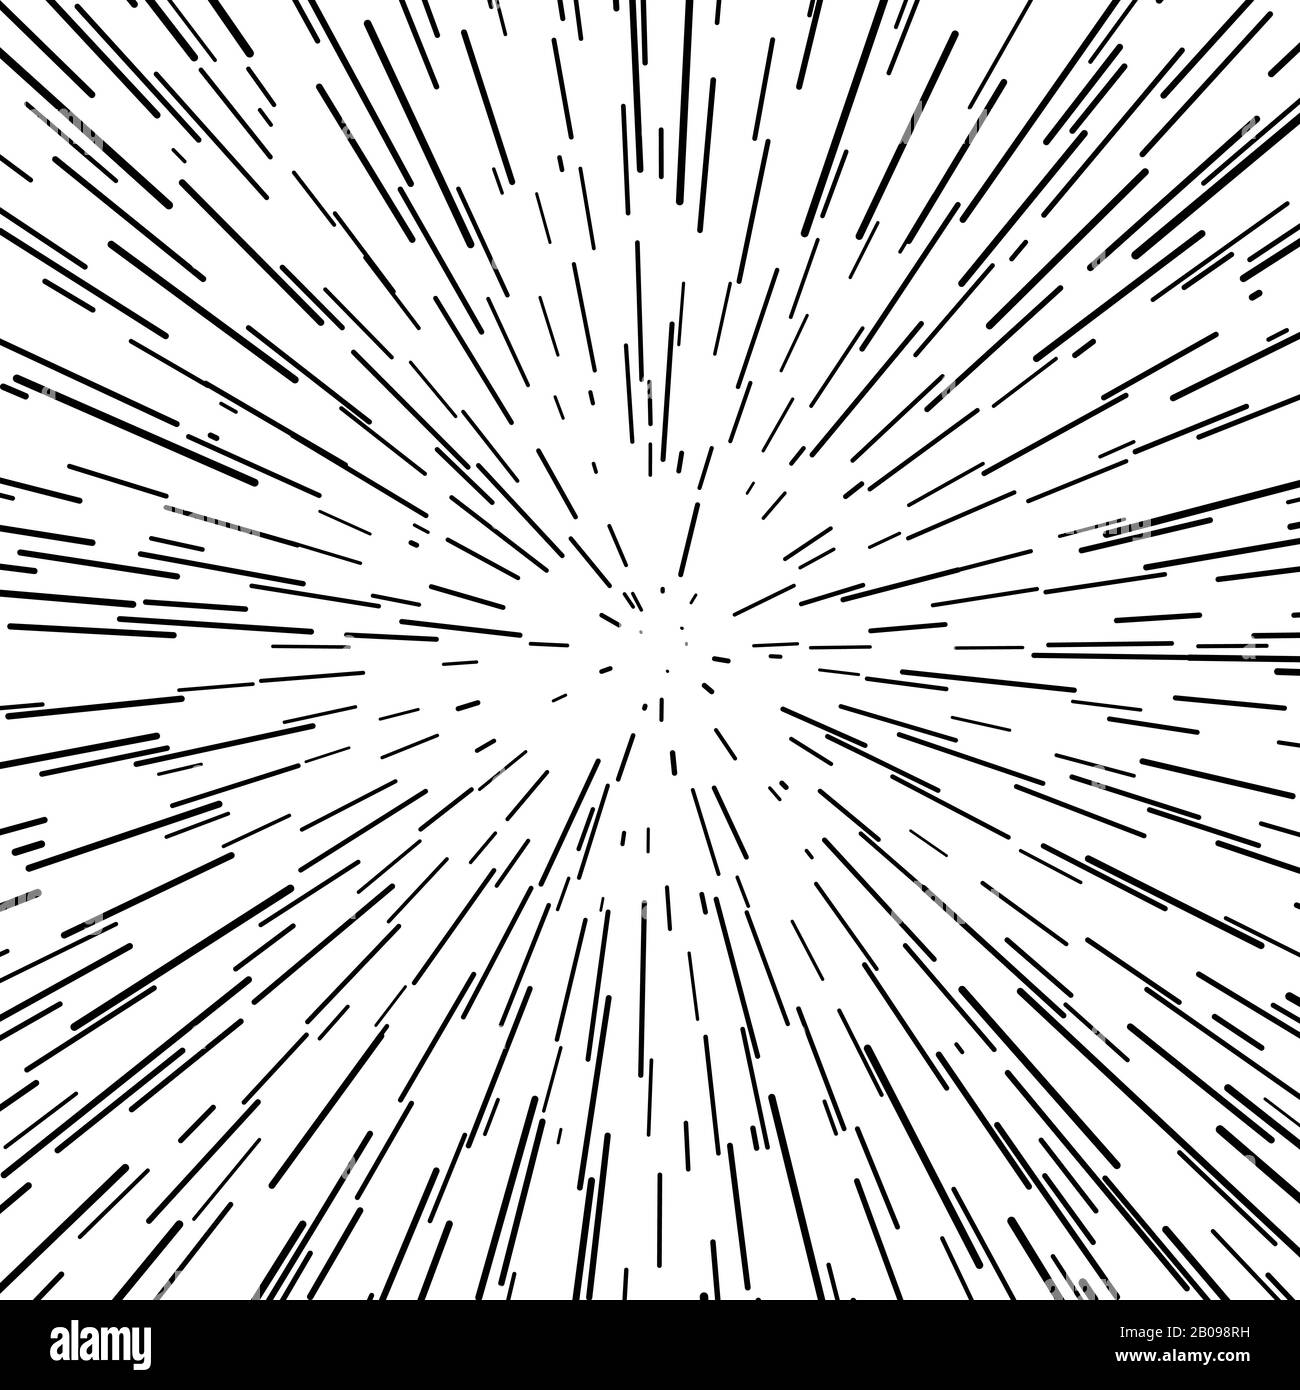 Radial speed, explosion, warp, zoom effect with lines abstract vector background. Radial effect from explosion, linear abstract radial background illustration Stock Vector